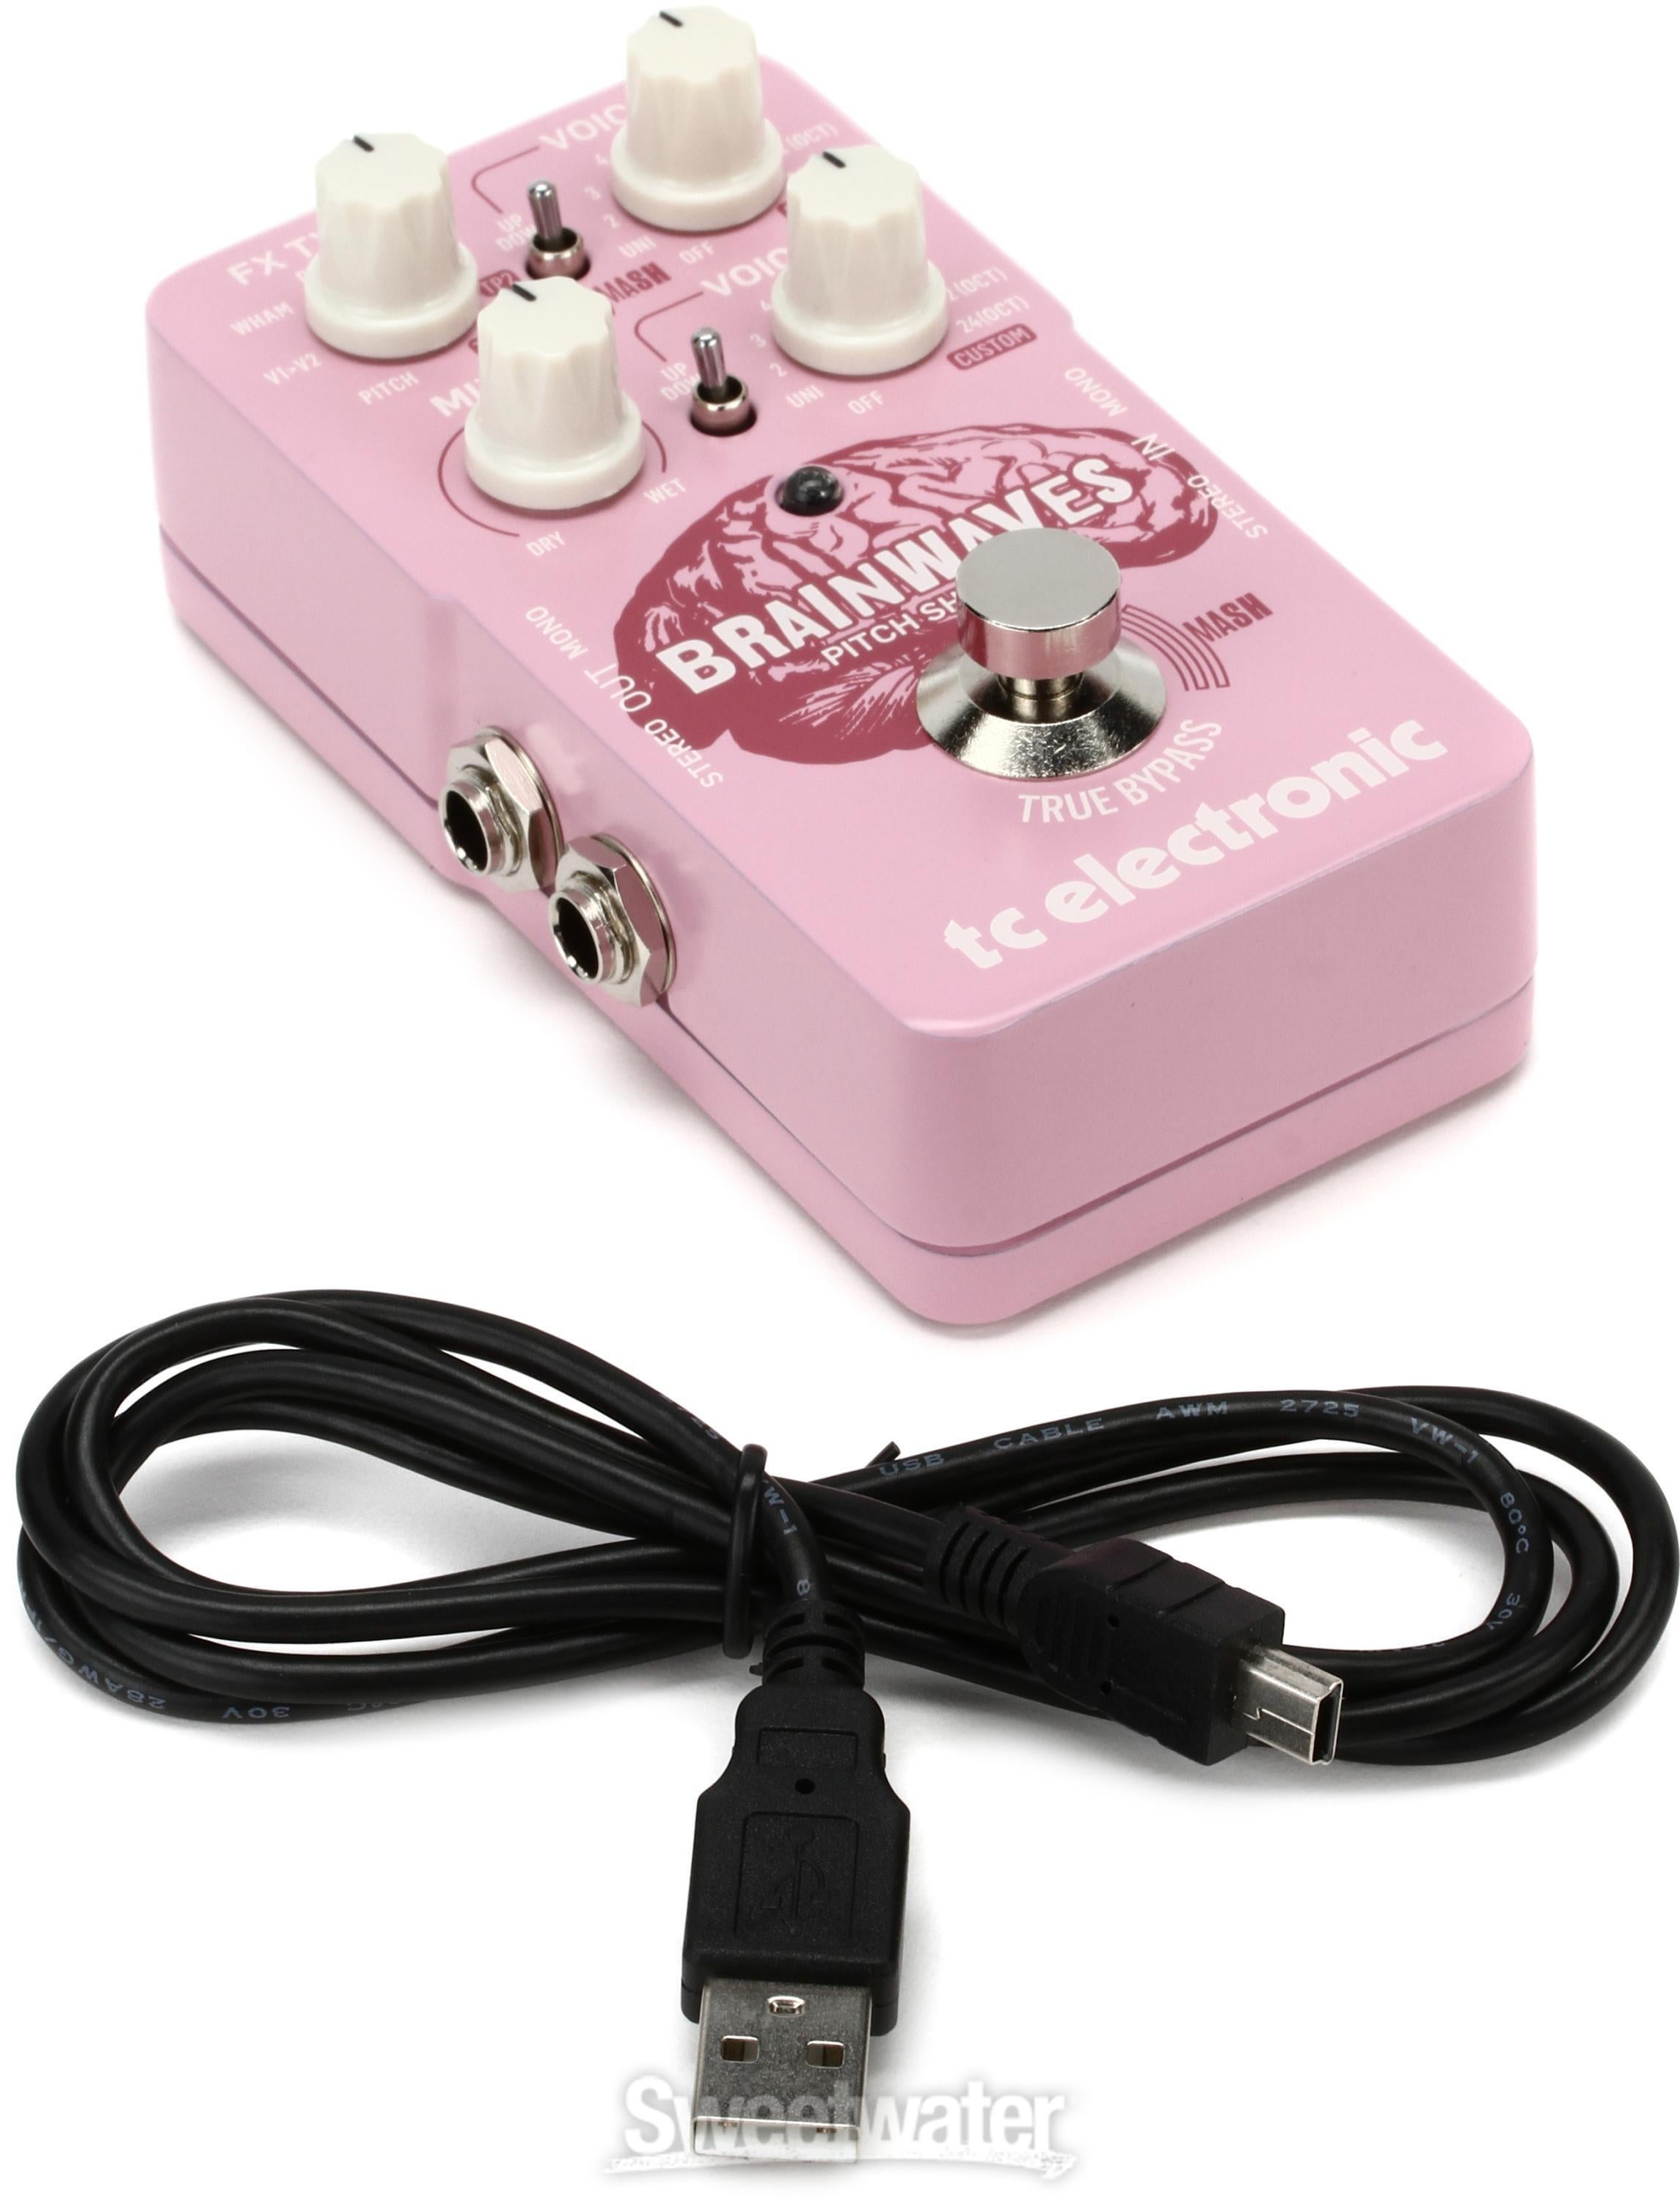 TC Electronic Brainwaves Pitch Shifter Pedal | Sweetwater